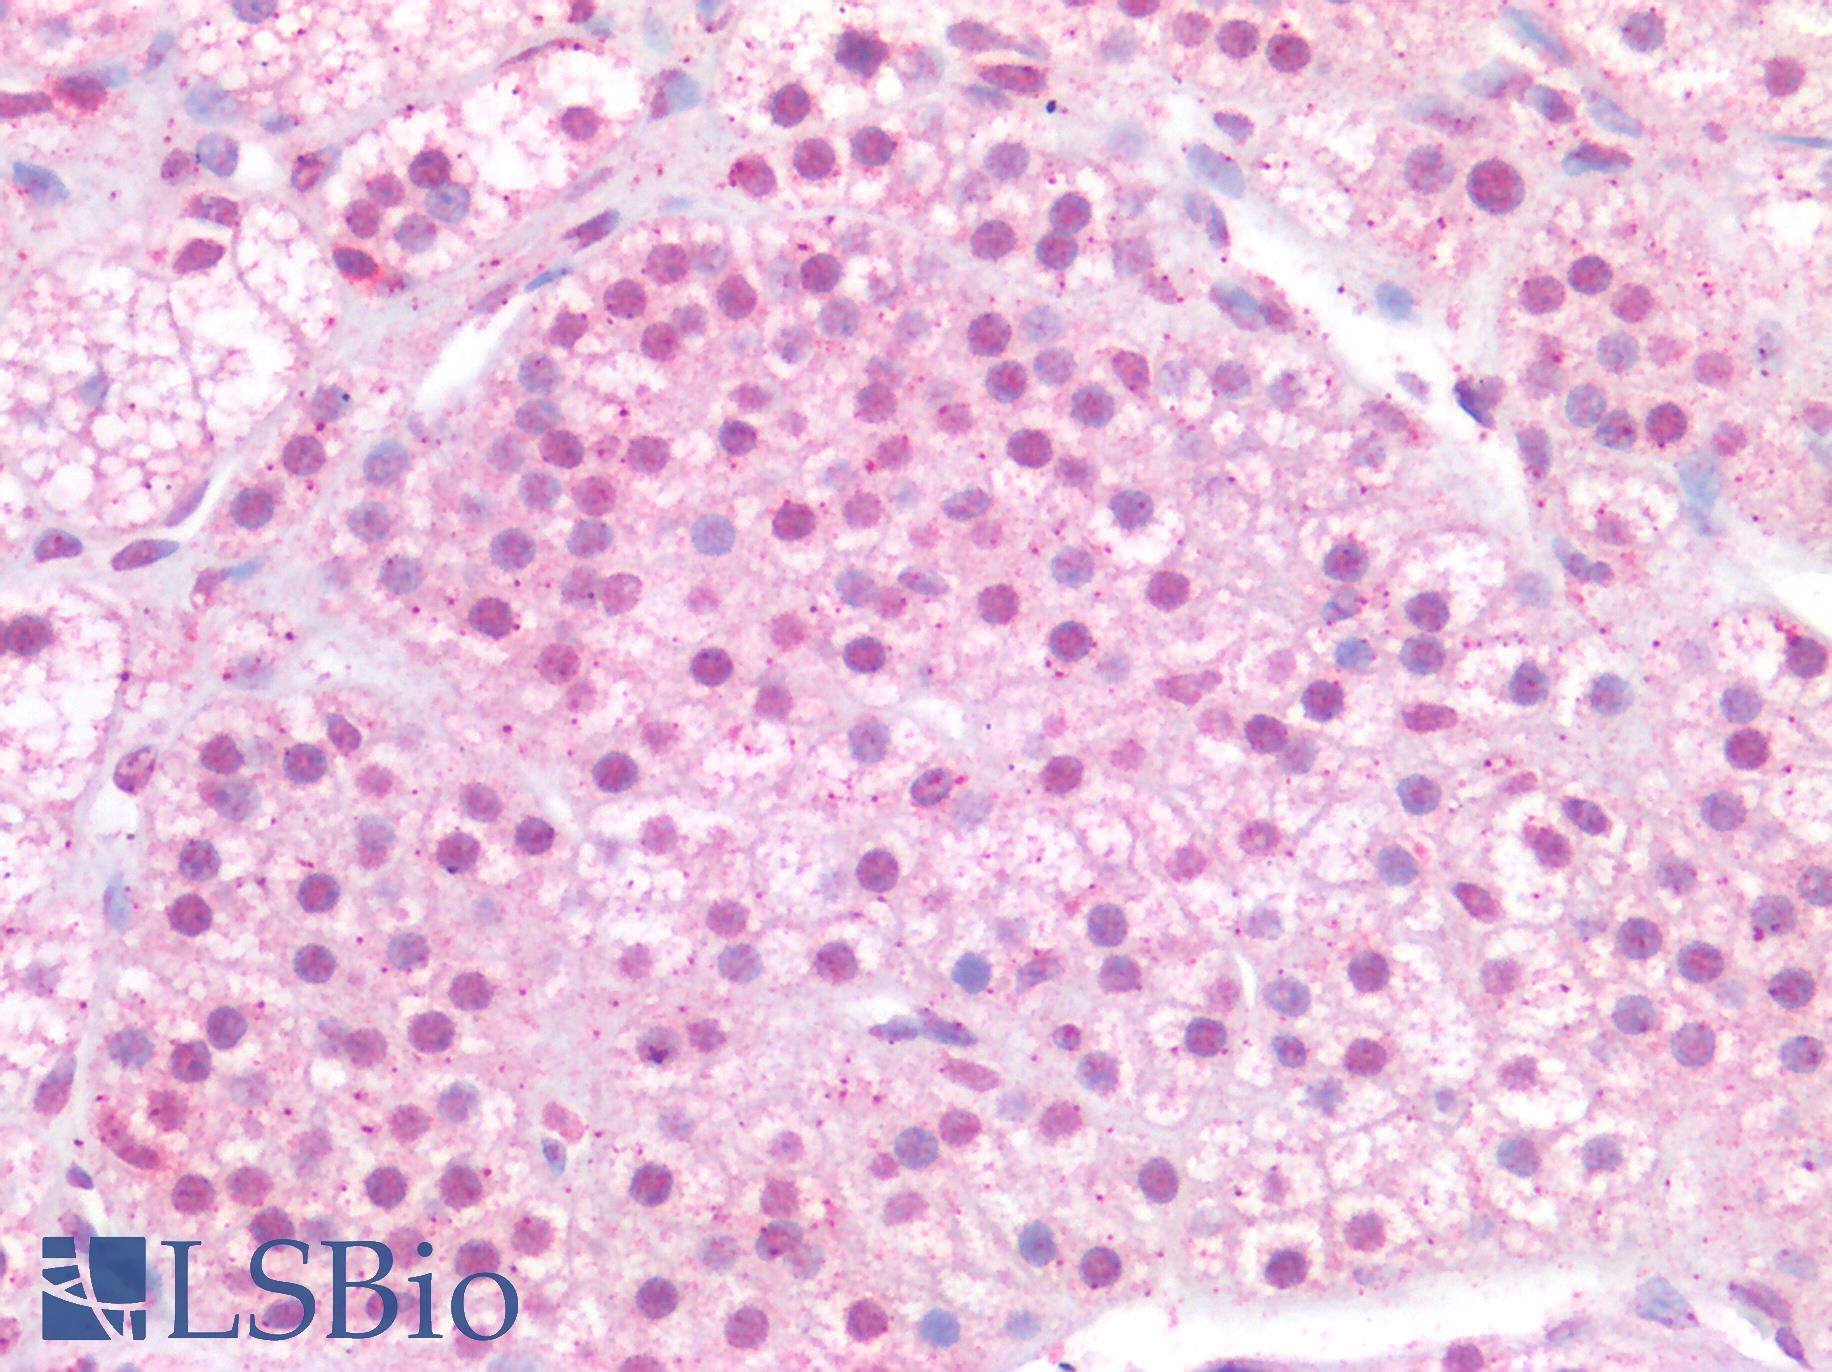 MAX Antibody - Human Adrenal: Formalin-Fixed, Paraffin-Embedded (FFPE)